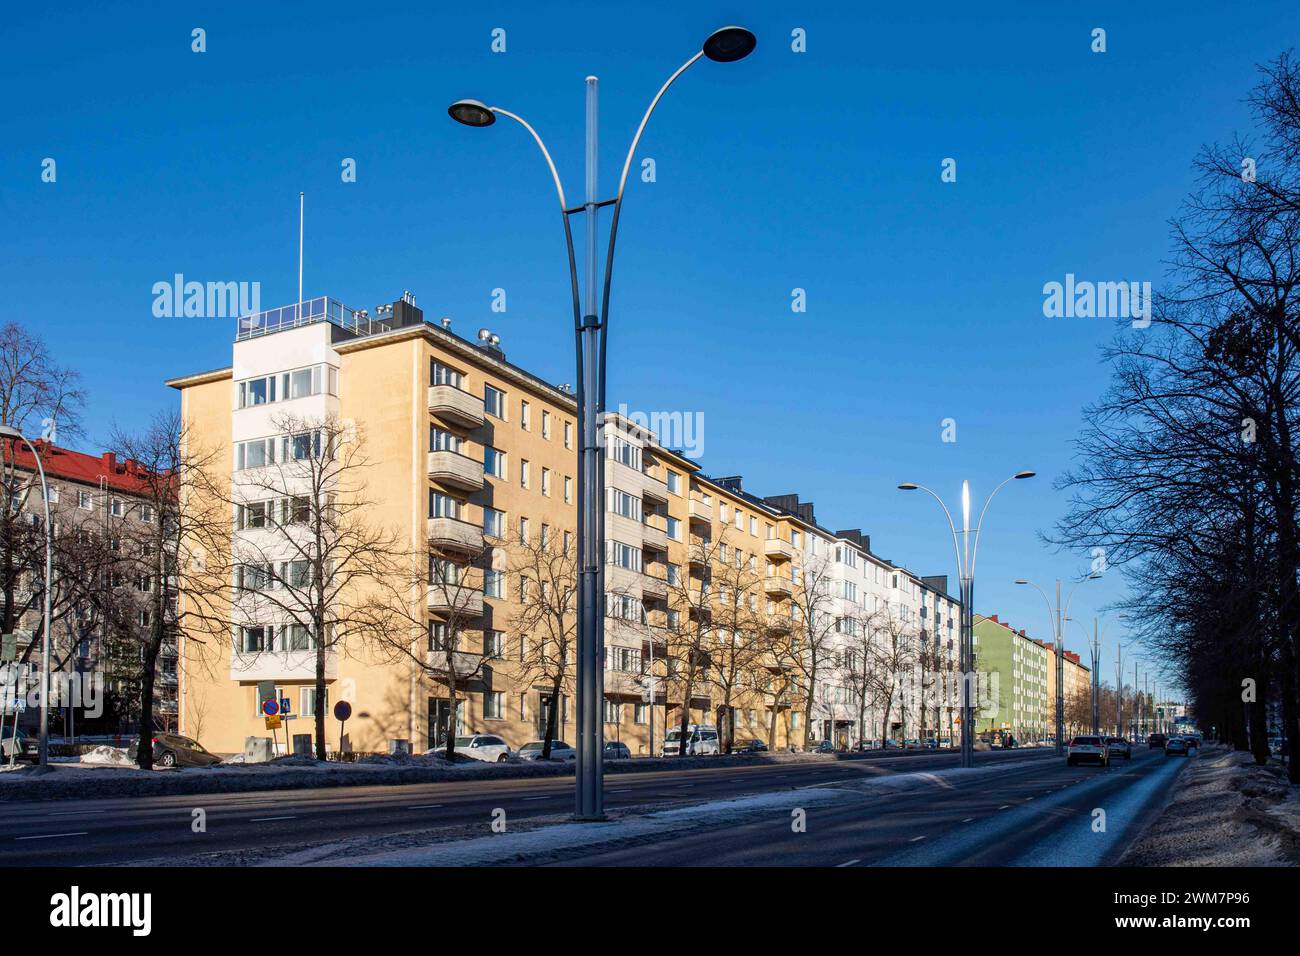 Huopalahdentie residential buildings and art deco lamp posts in Munkkiniemi district of Helsinki, Finland Stock Photo